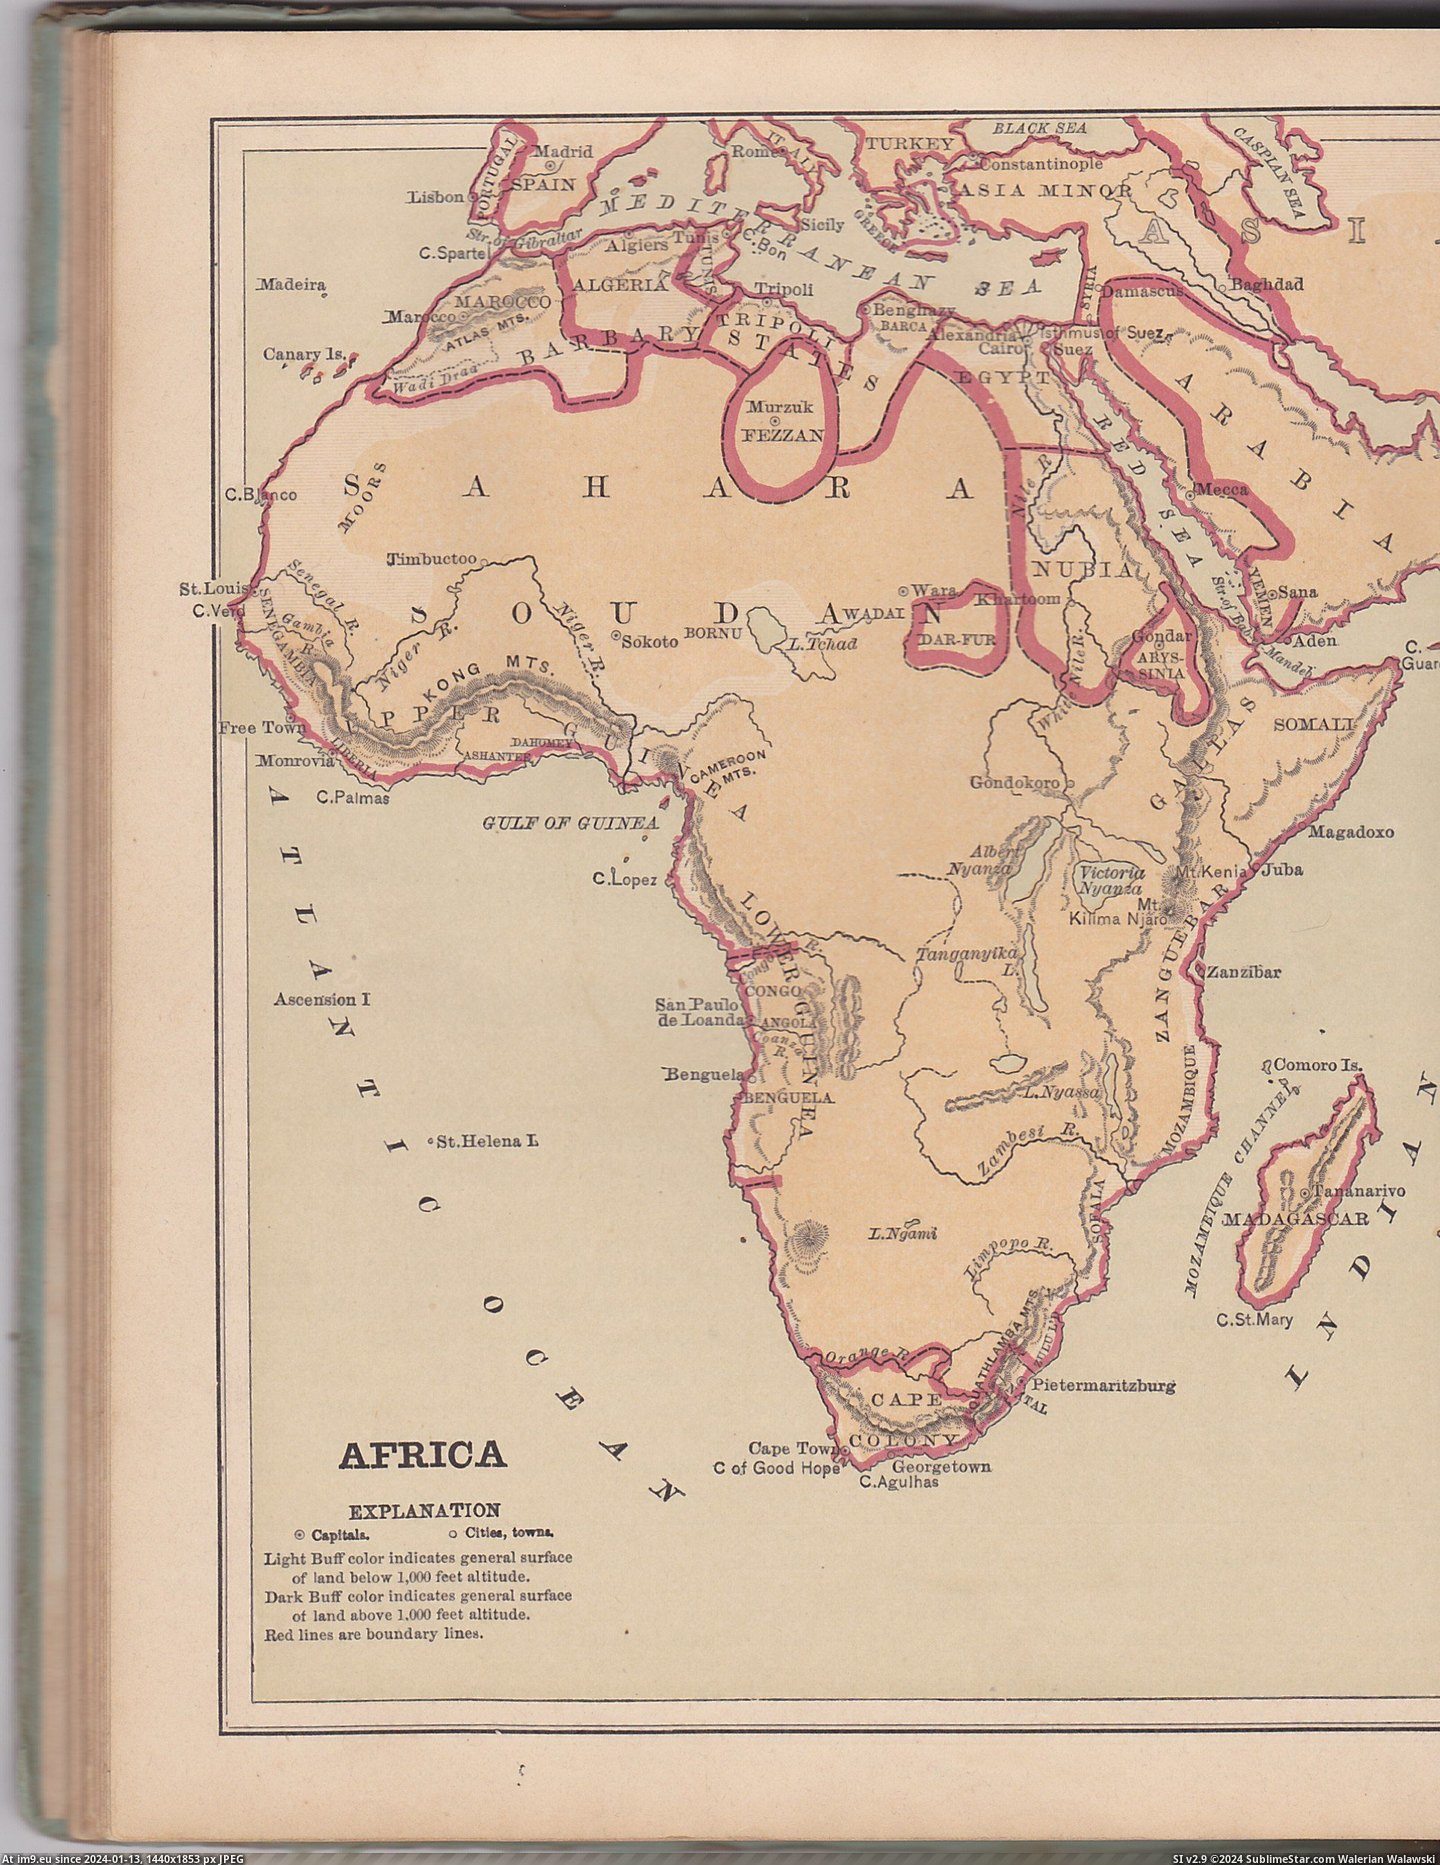 #Africa #Pre #Colonial #Guyot #Elementary #Geography [Mapporn] Pre-Colonial Africa in 1875, From 'Guyot's Elementary Geography' [OC][2080x2668] Pic. (Изображение из альбом My r/MAPS favs))